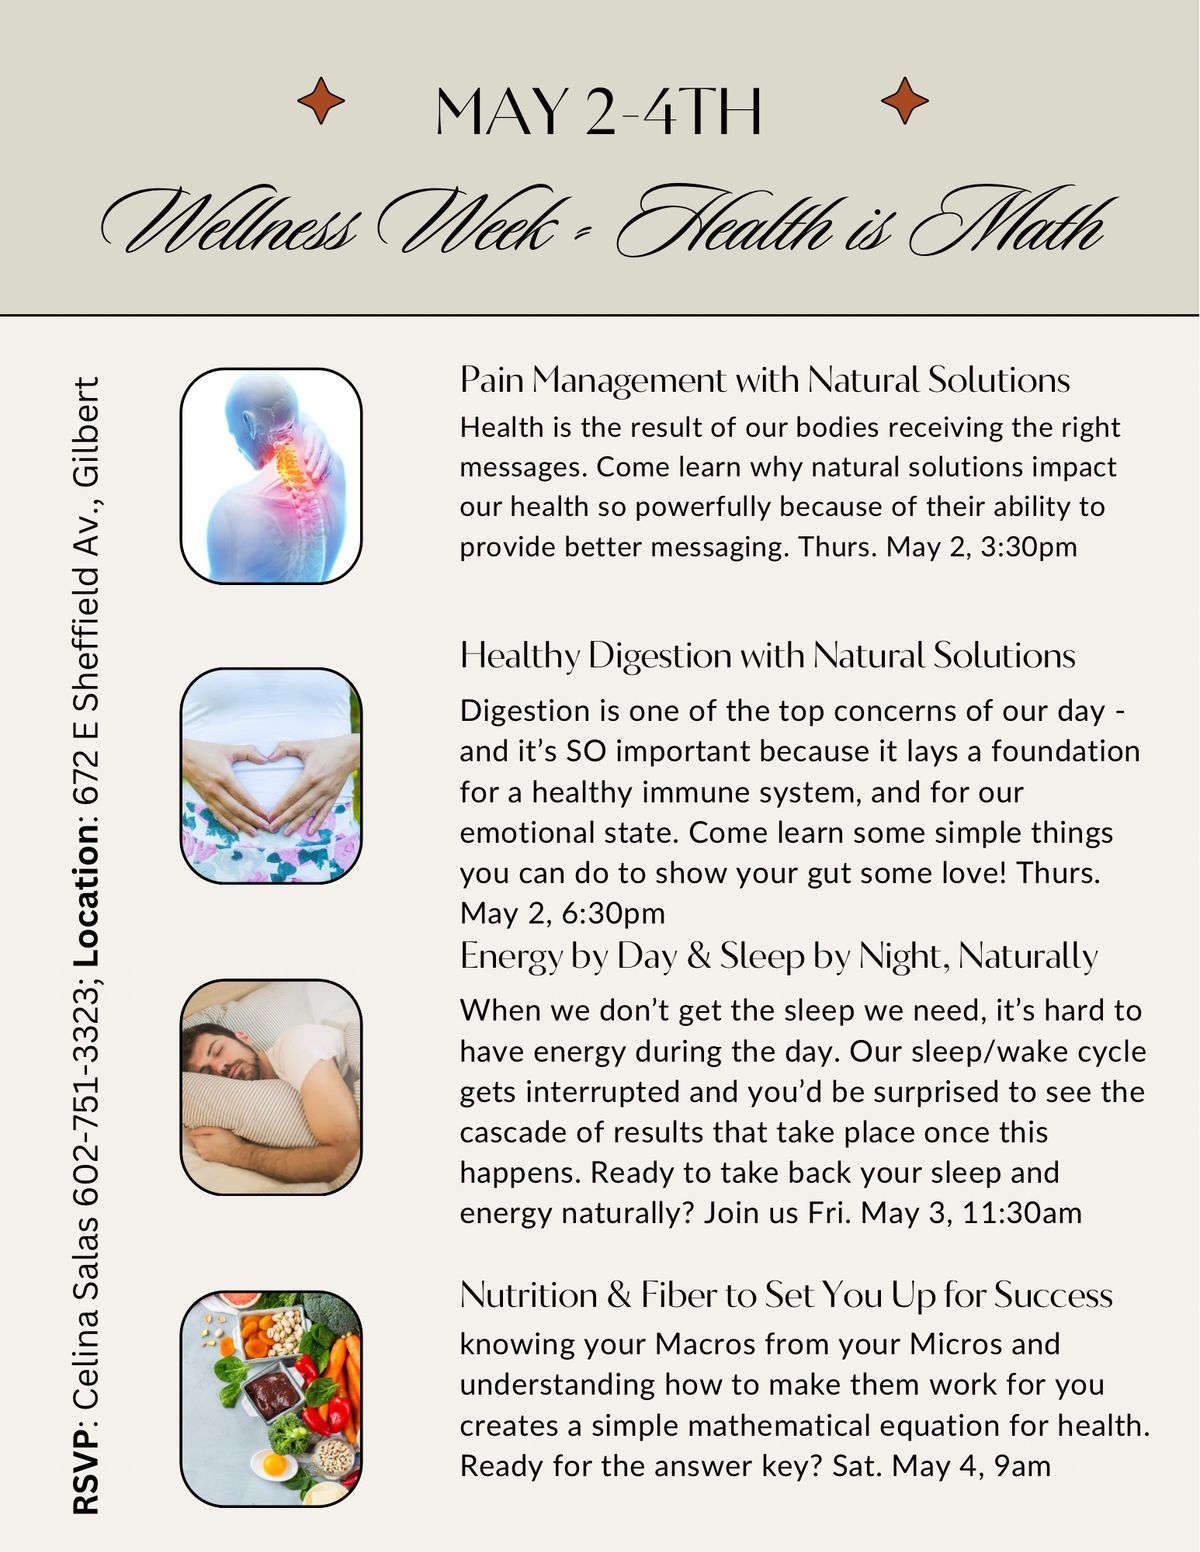 Wellness Week -Pain Management with Natural Solutions - Health is Math